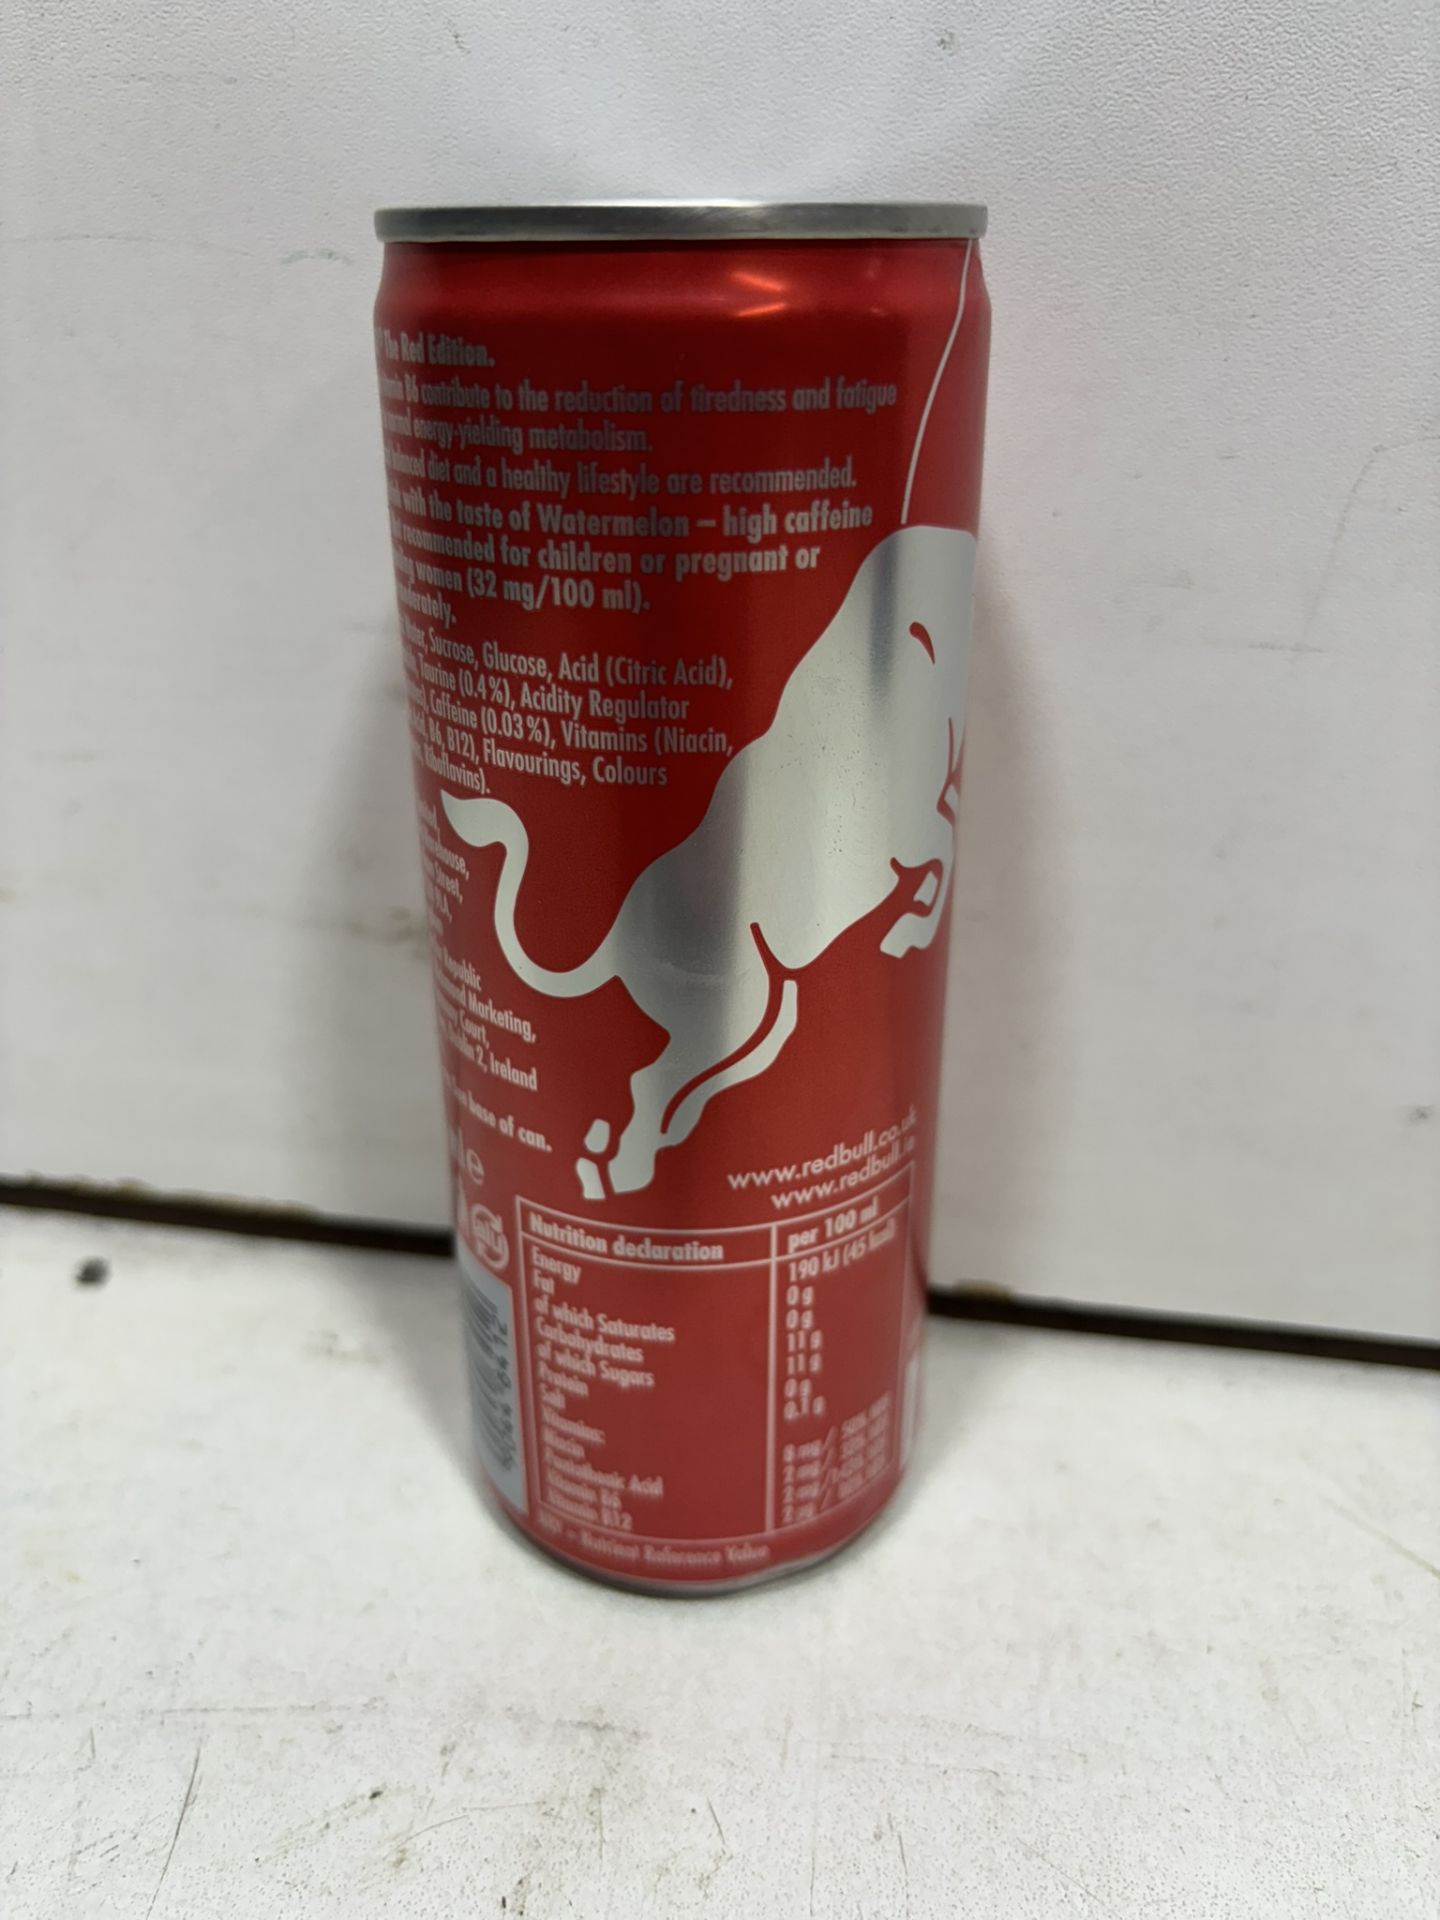 65 X Cans Of Red Bull 'The Red Edition' Watermelon Energy Drinks, 250Ml - Image 3 of 4